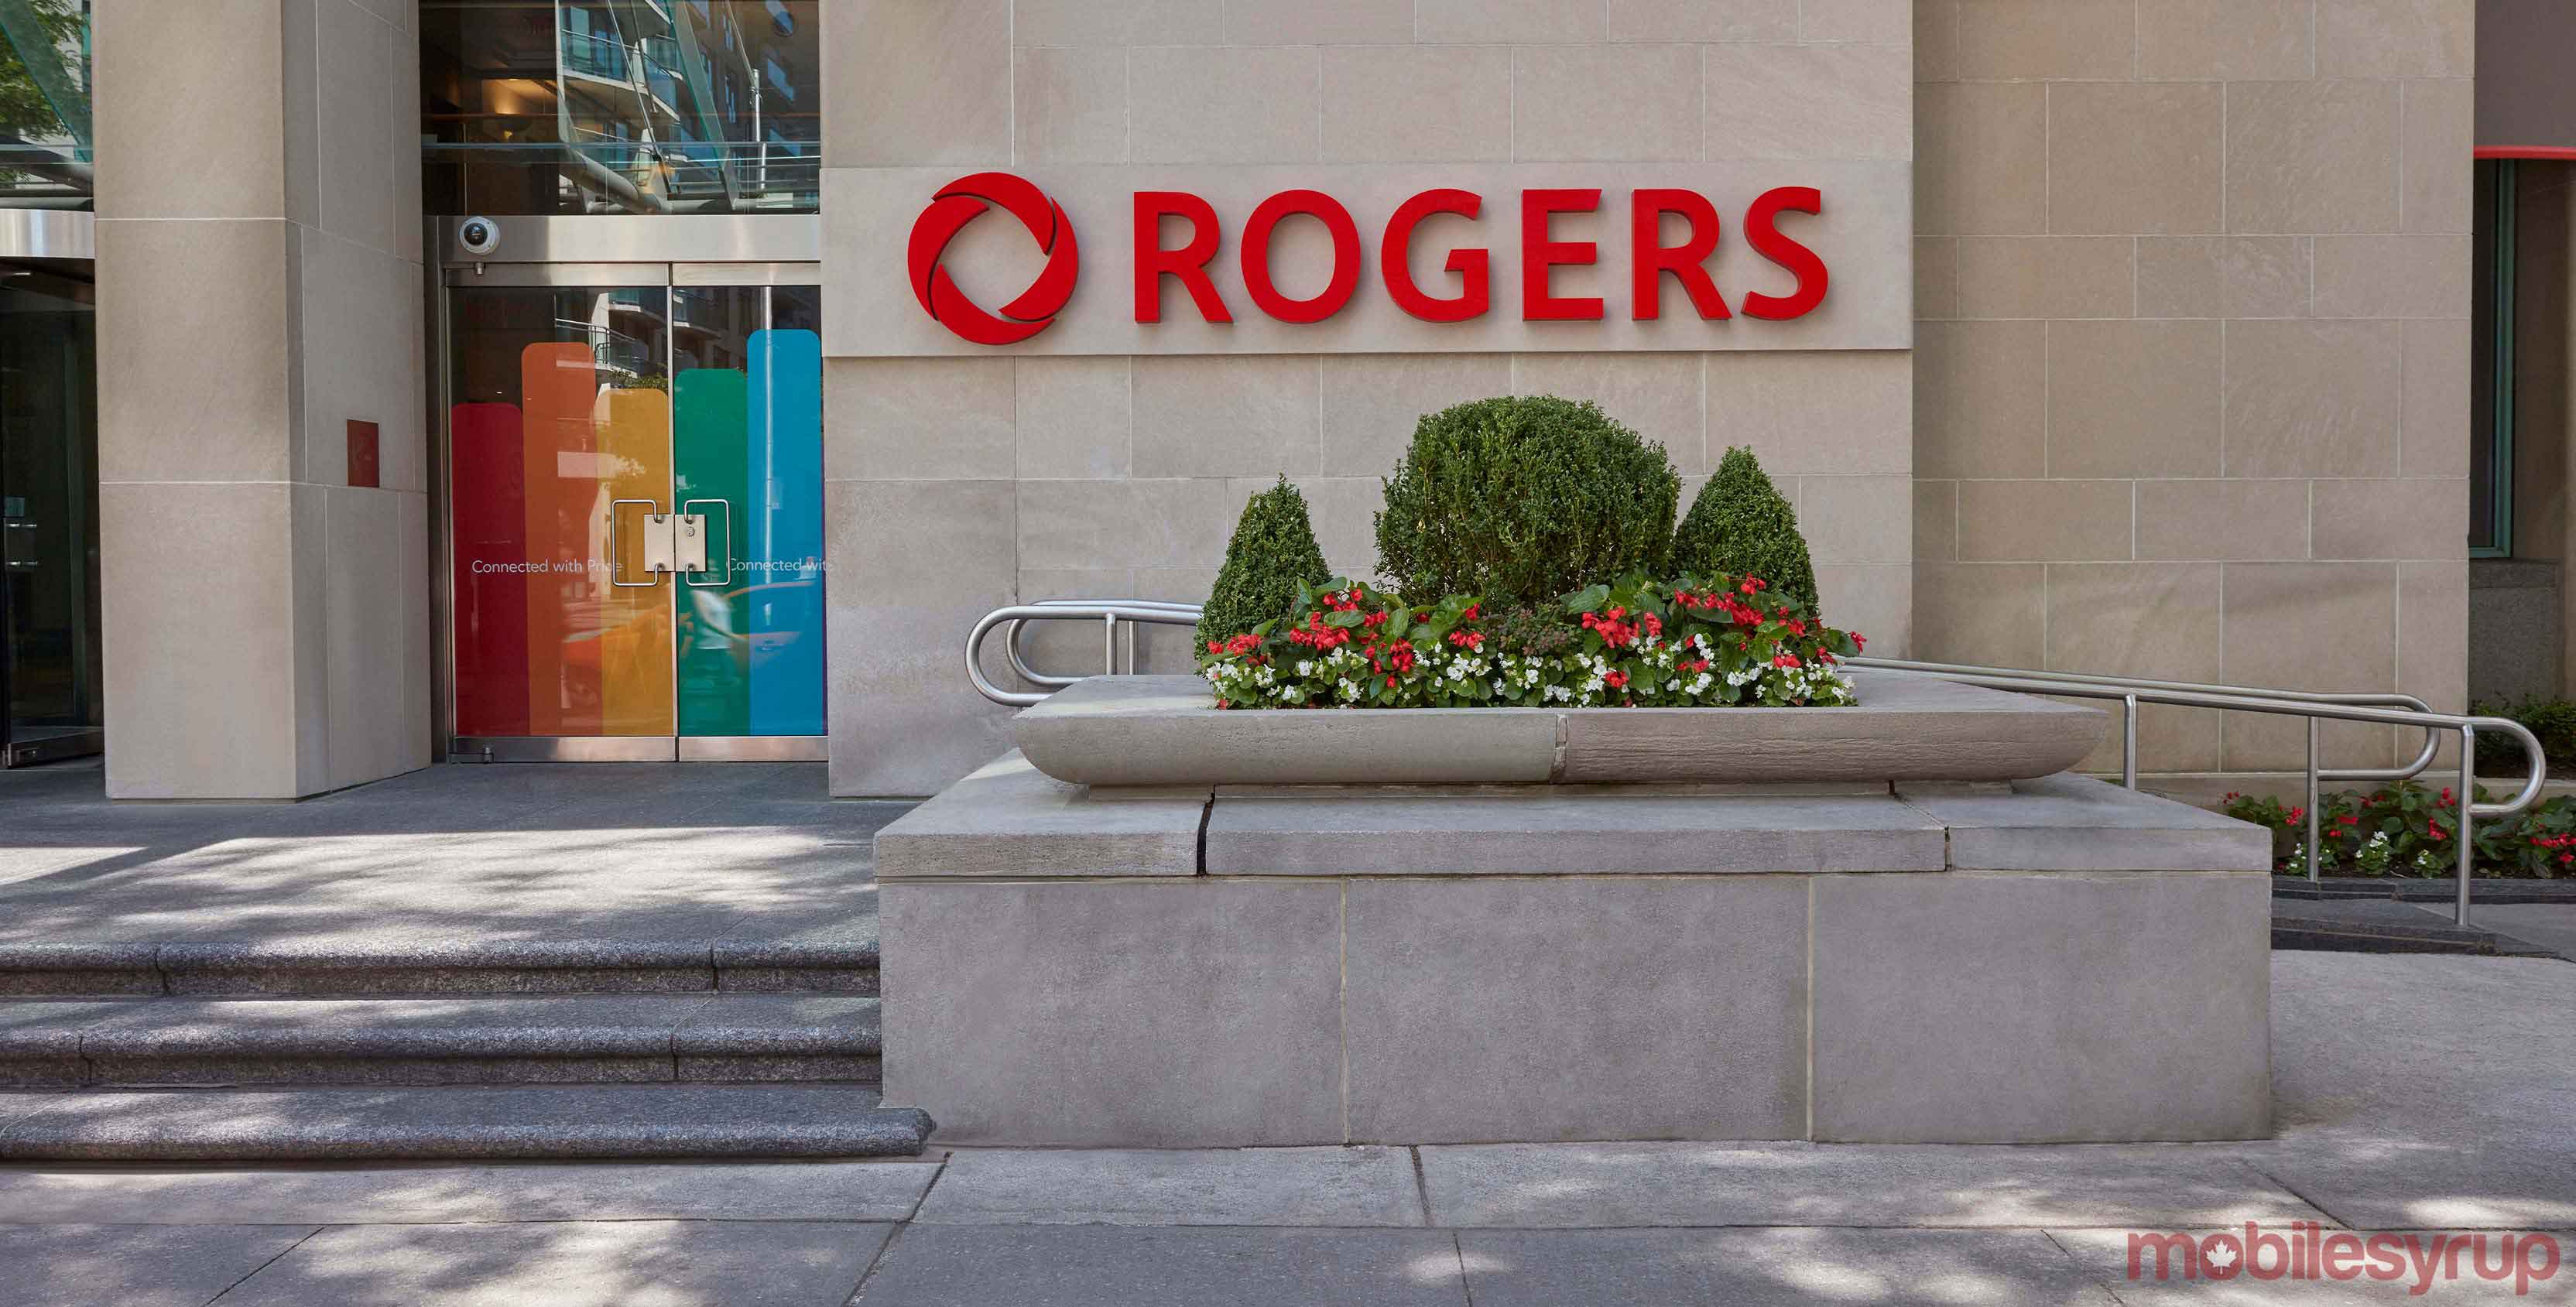 Rogers head office with logo